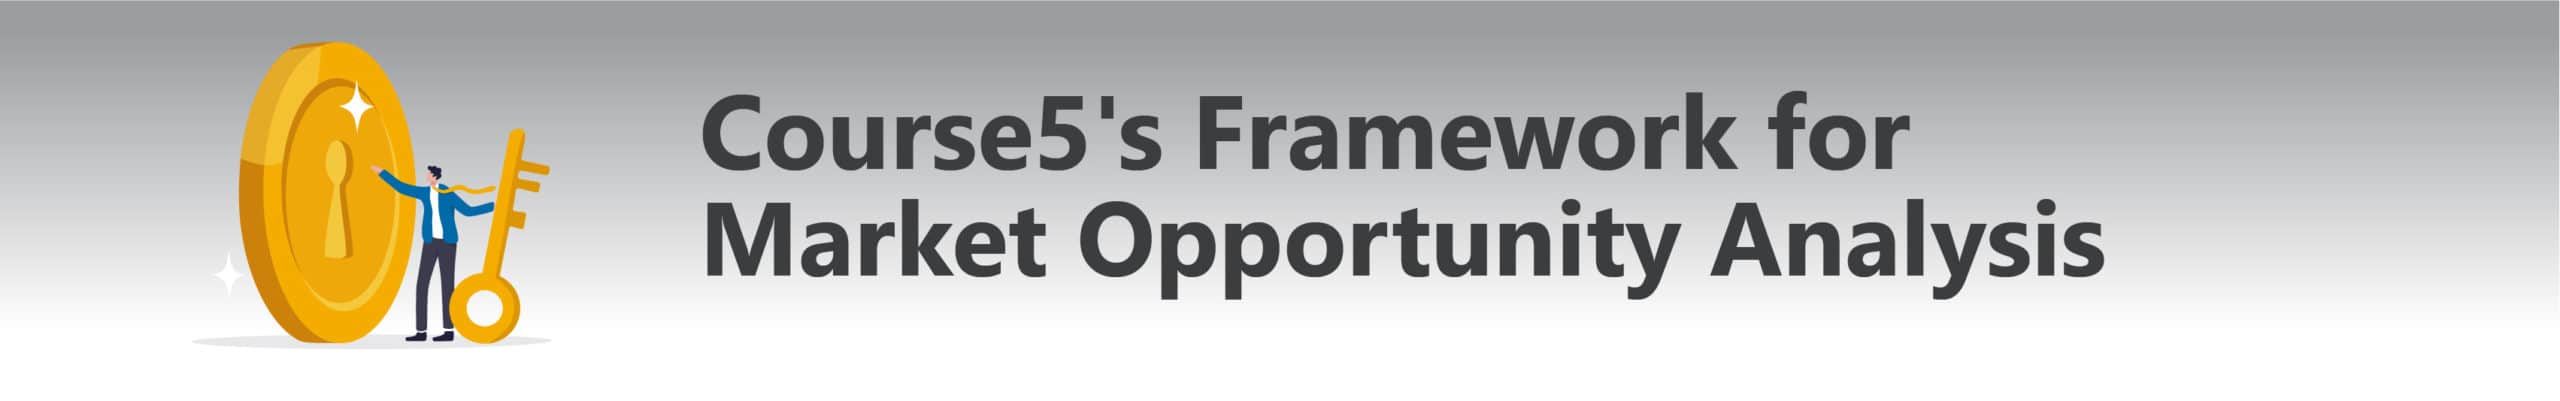 Course5's Framework for Market Opportunity Analysis